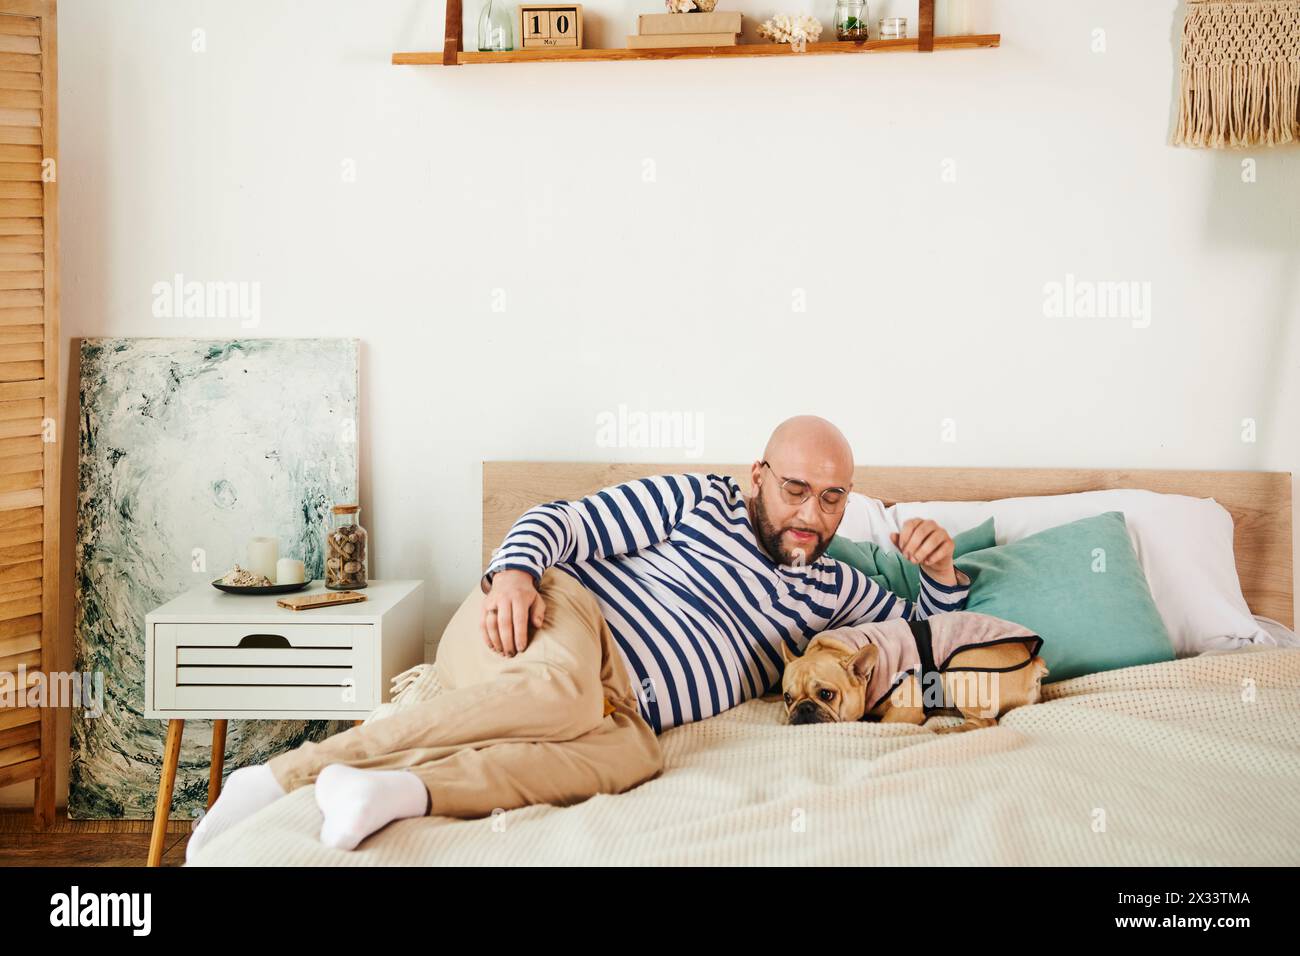 Handsome man with glasses laying on a bed next to a french bulldog. Stock Photo